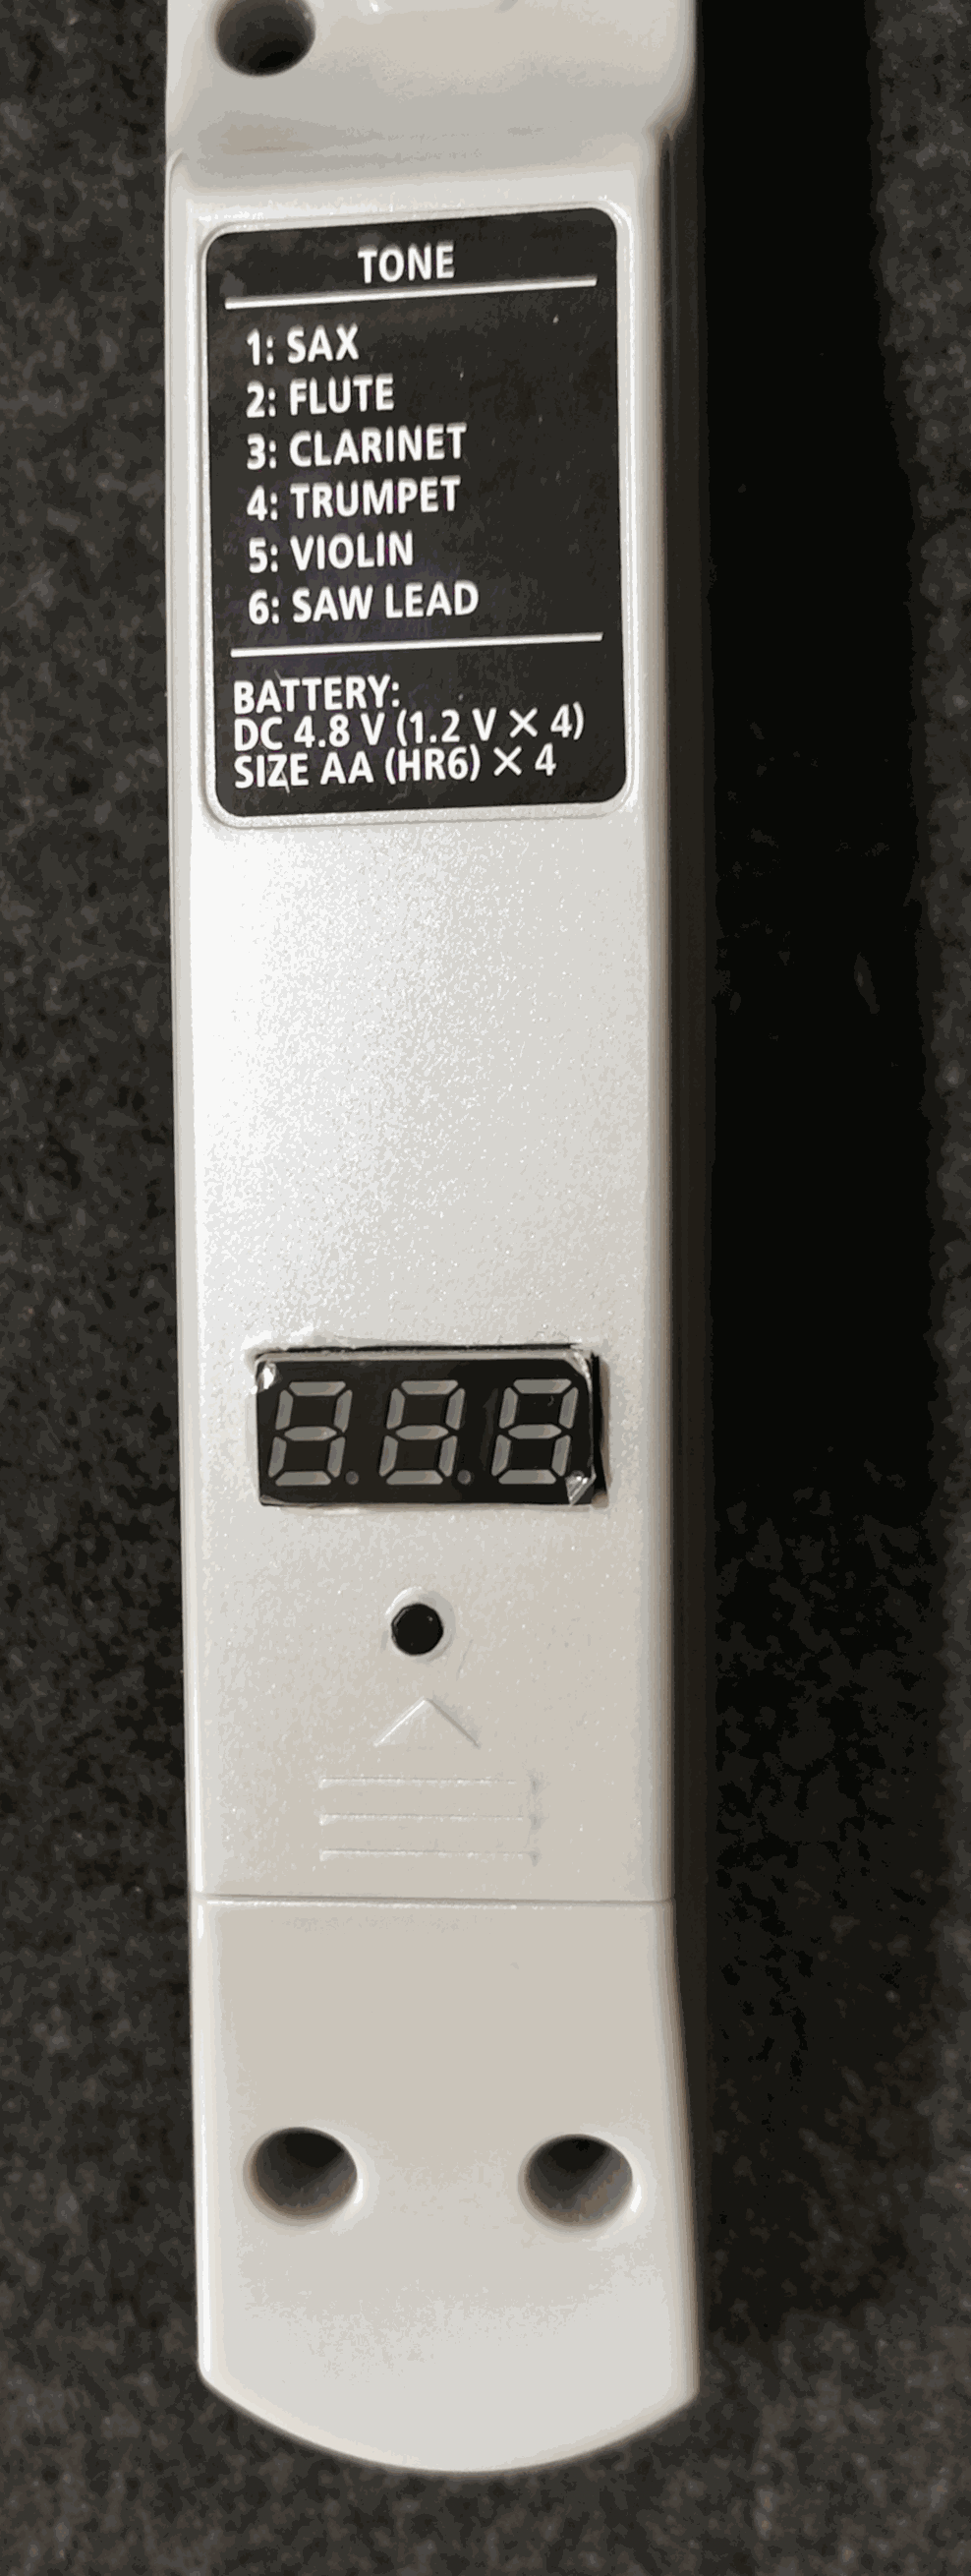 Roland Aerohone Mini - Adding a Voltmeter - Switched off